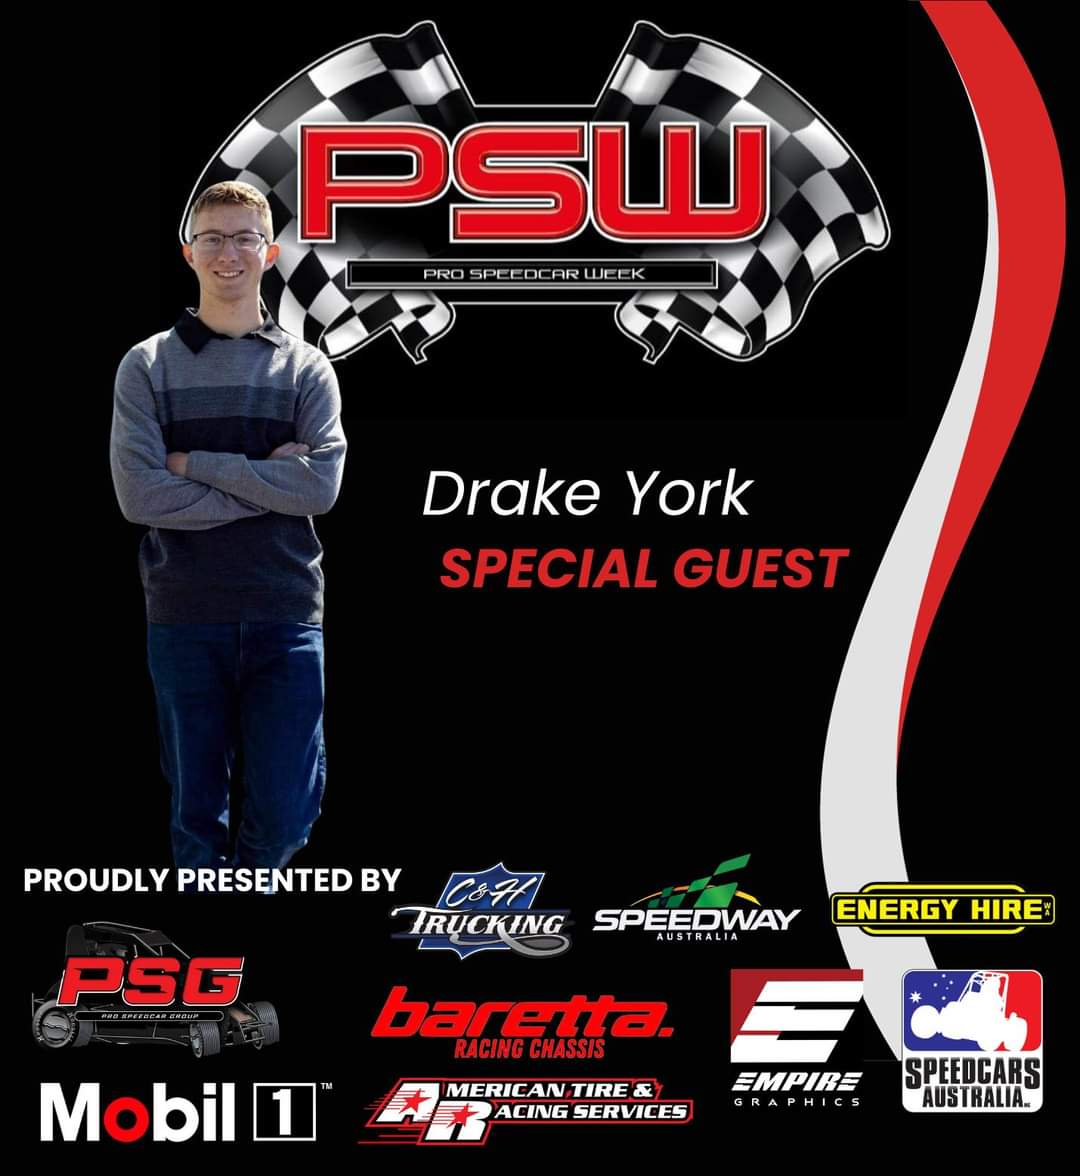 I'm excited and grateful for the opportunity to work with PSW and get down to Australia! I really appreciate Andy Pearce and everyone else involved for a fantastic opportunity to cover PSW and see some amazing race tracks. The series starts January 3rd at Murray Bridge Speedway!